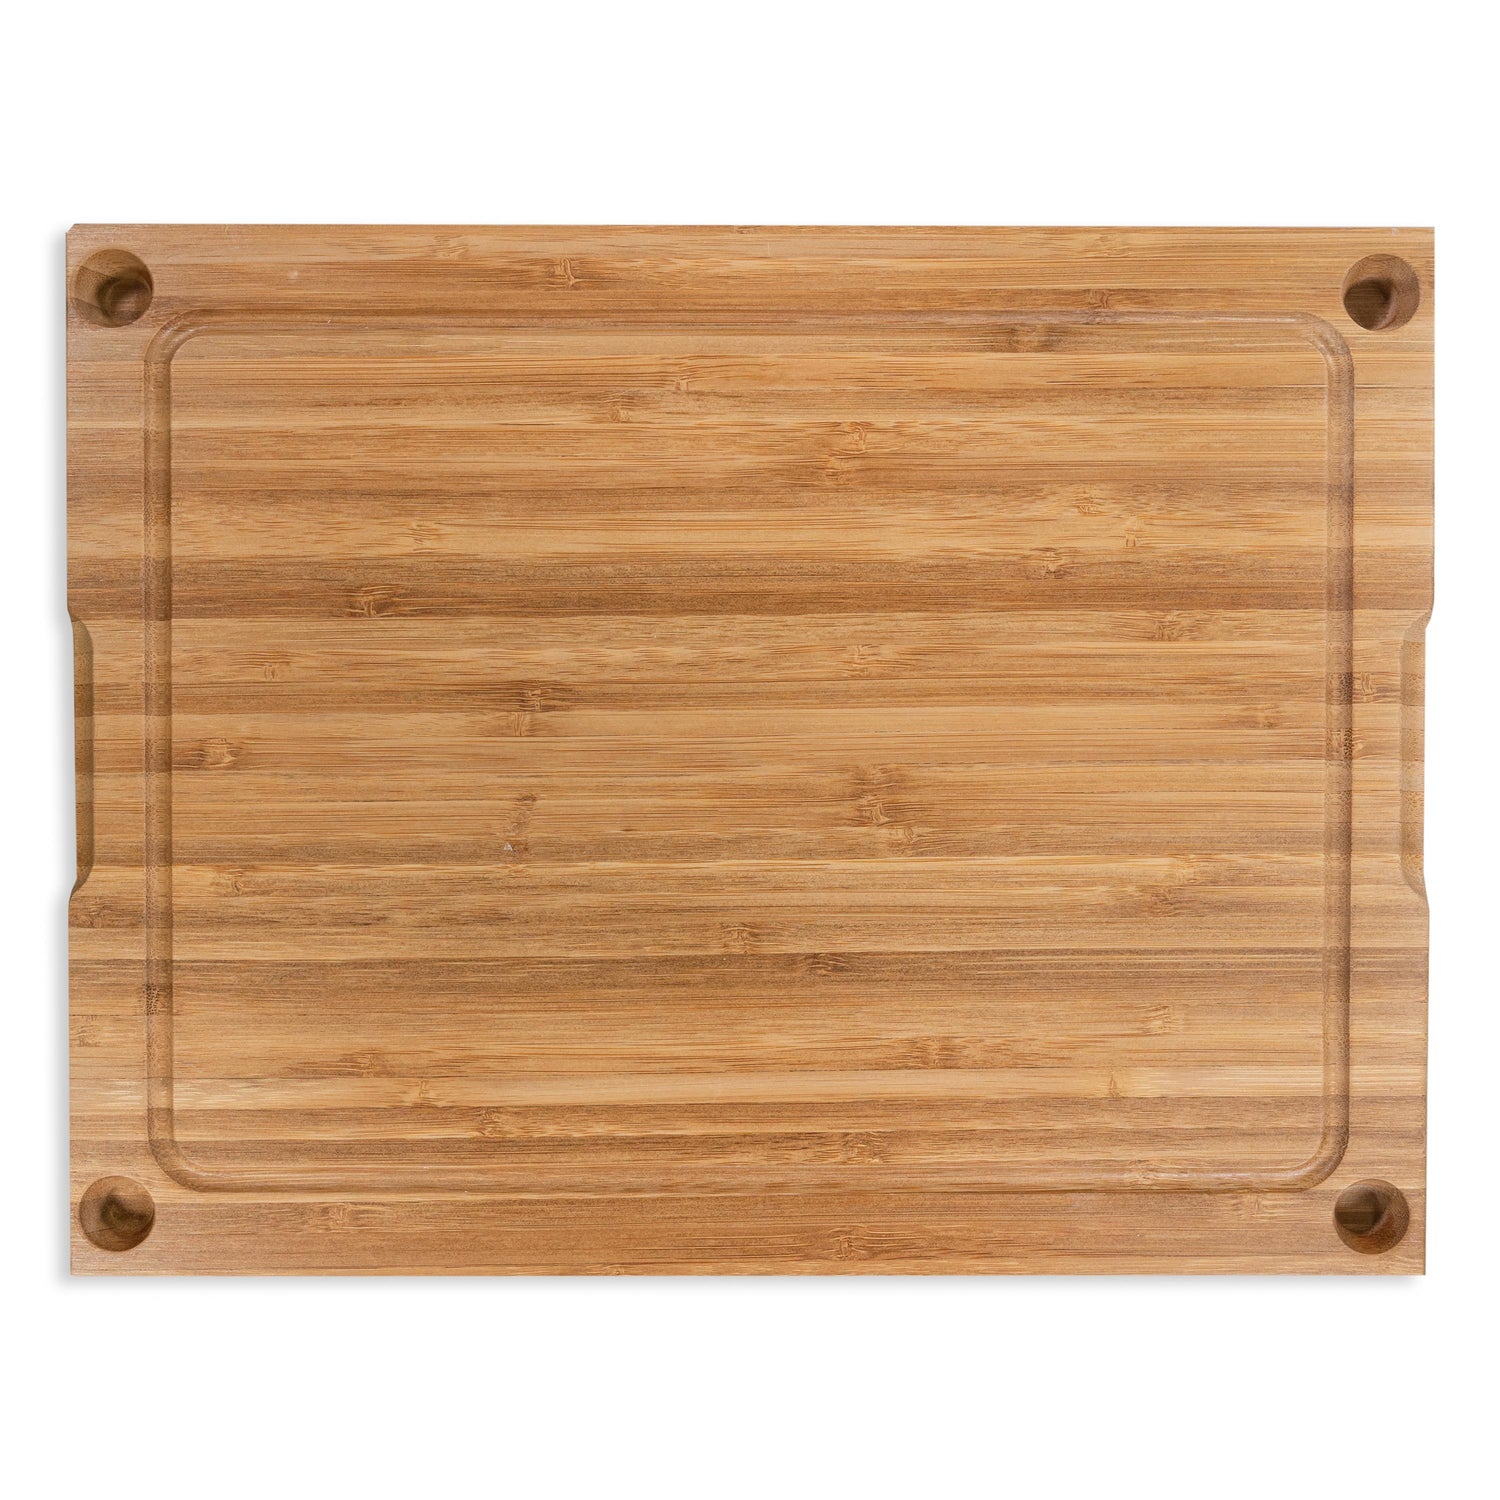 Texas A&M Concerto Glass Top Cutting Board